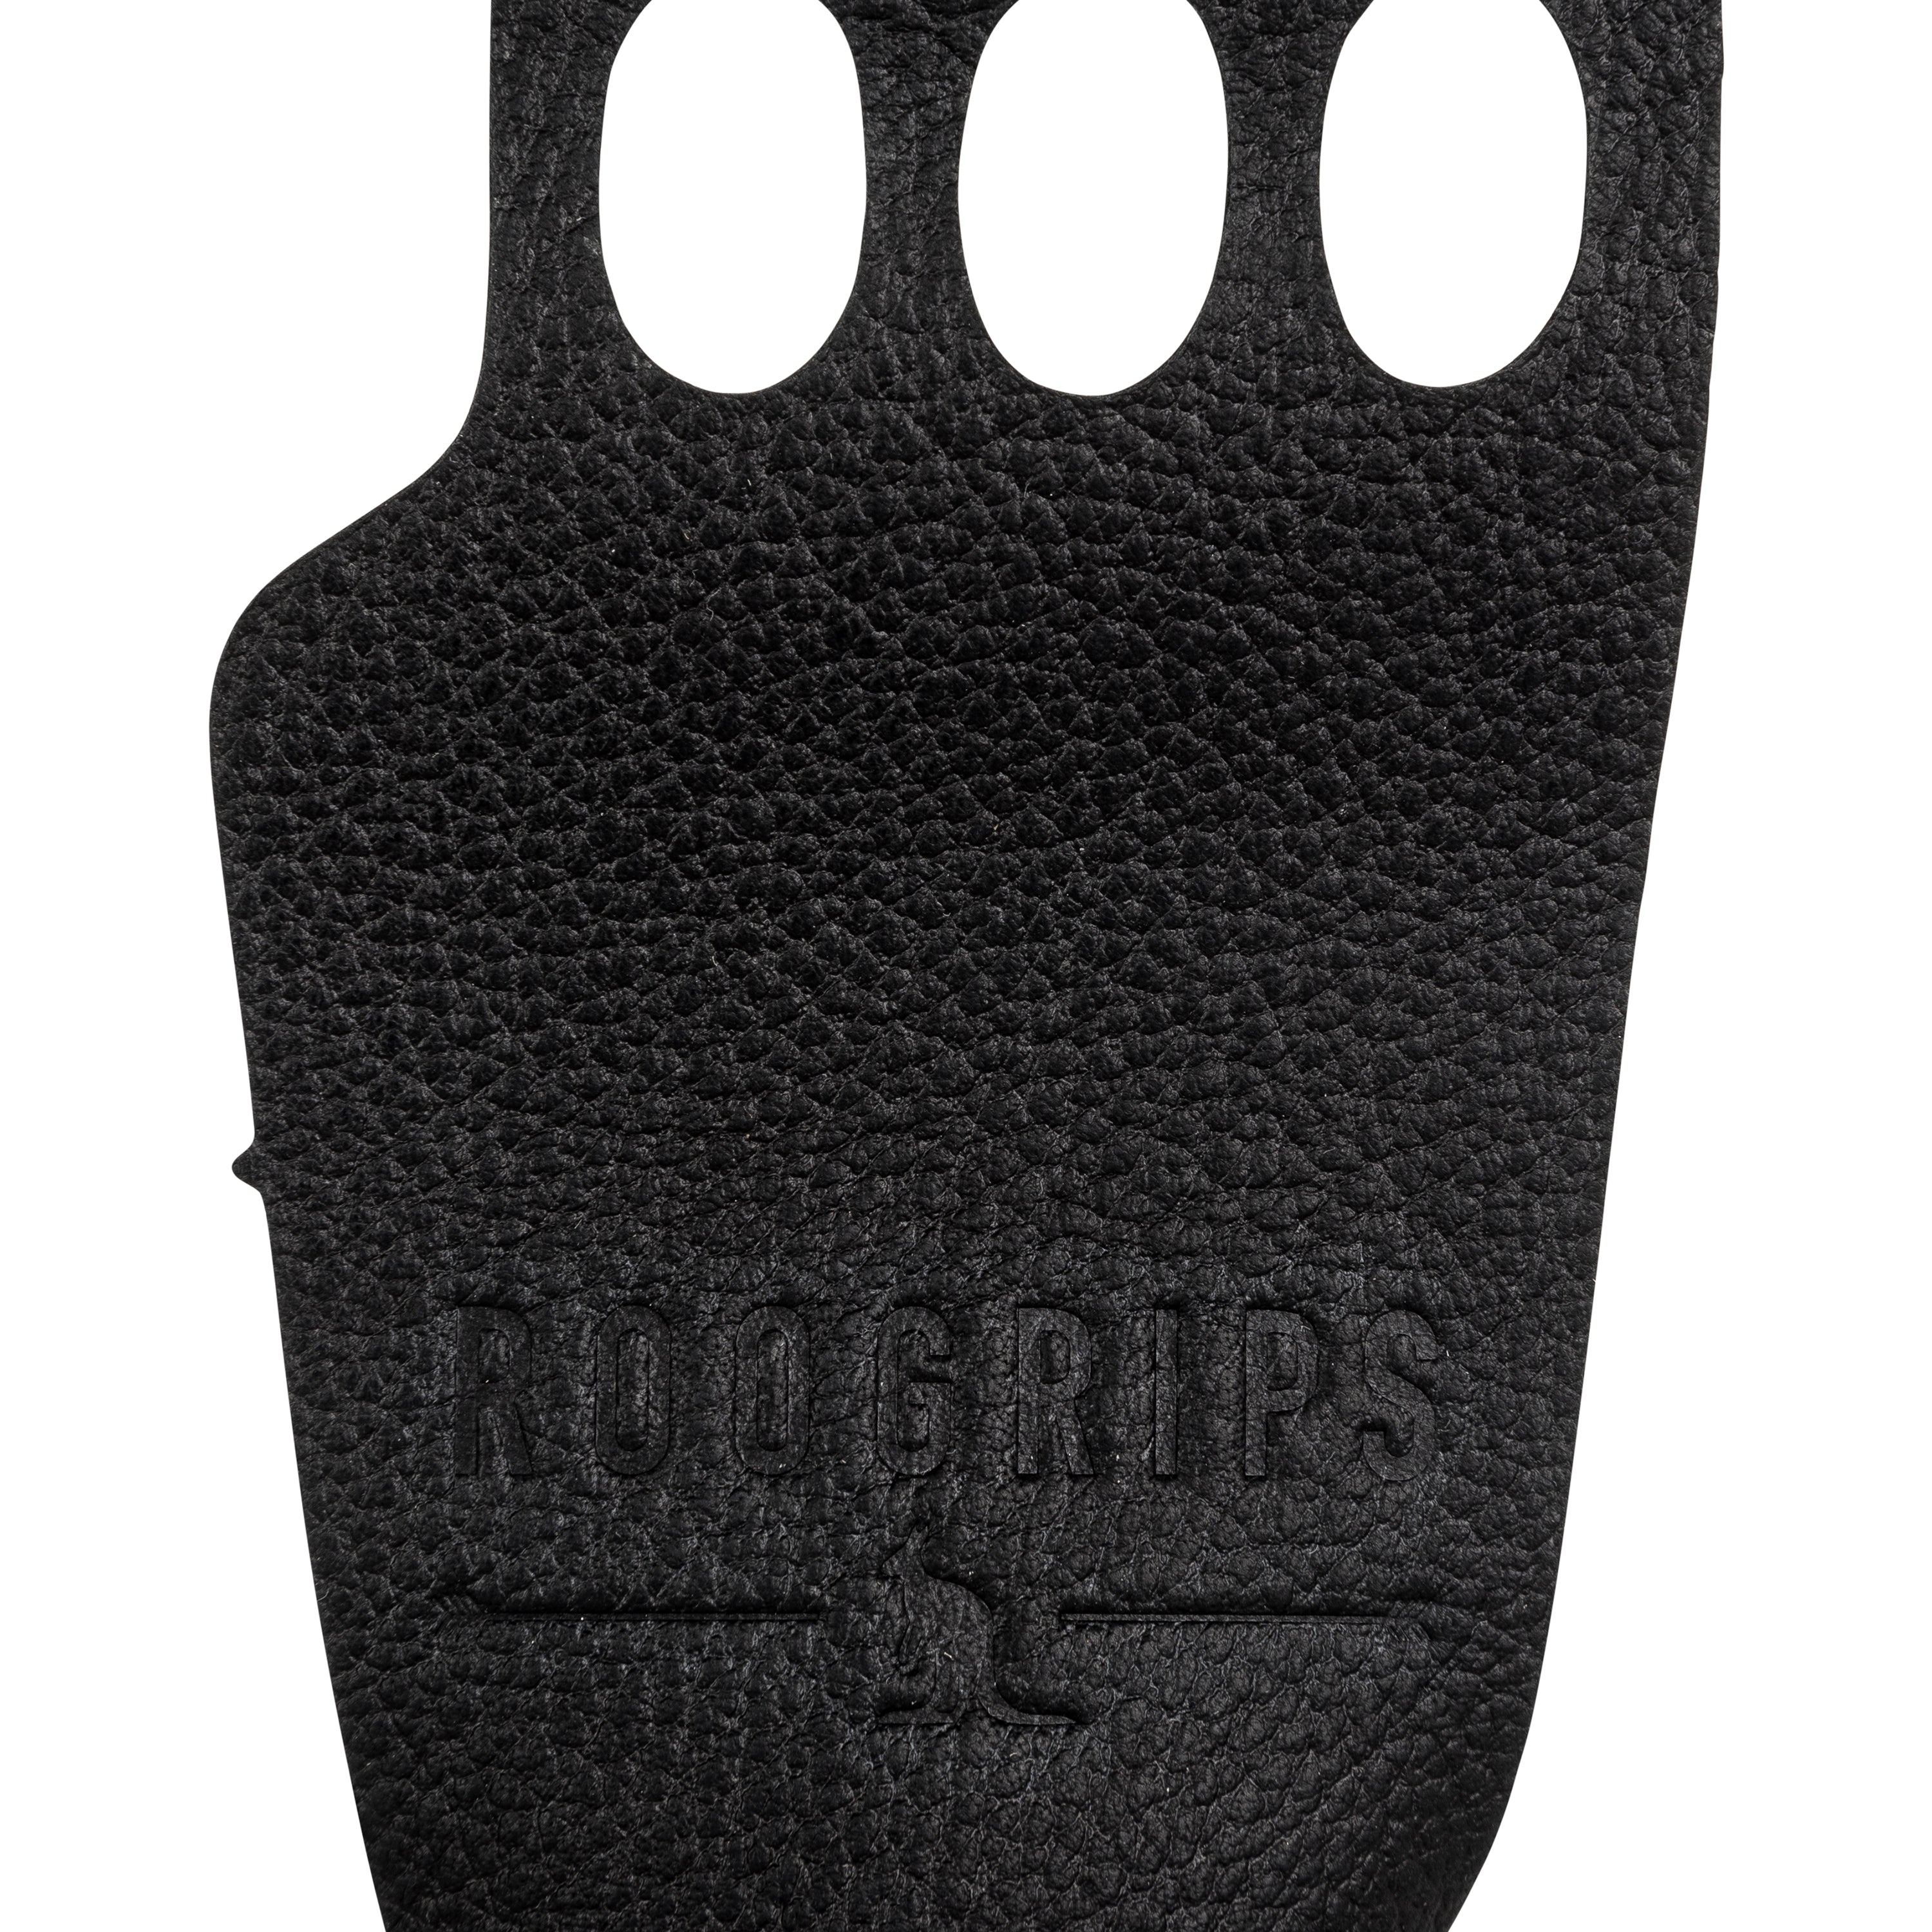 3 Finger Protective Leather Hand Grips Black